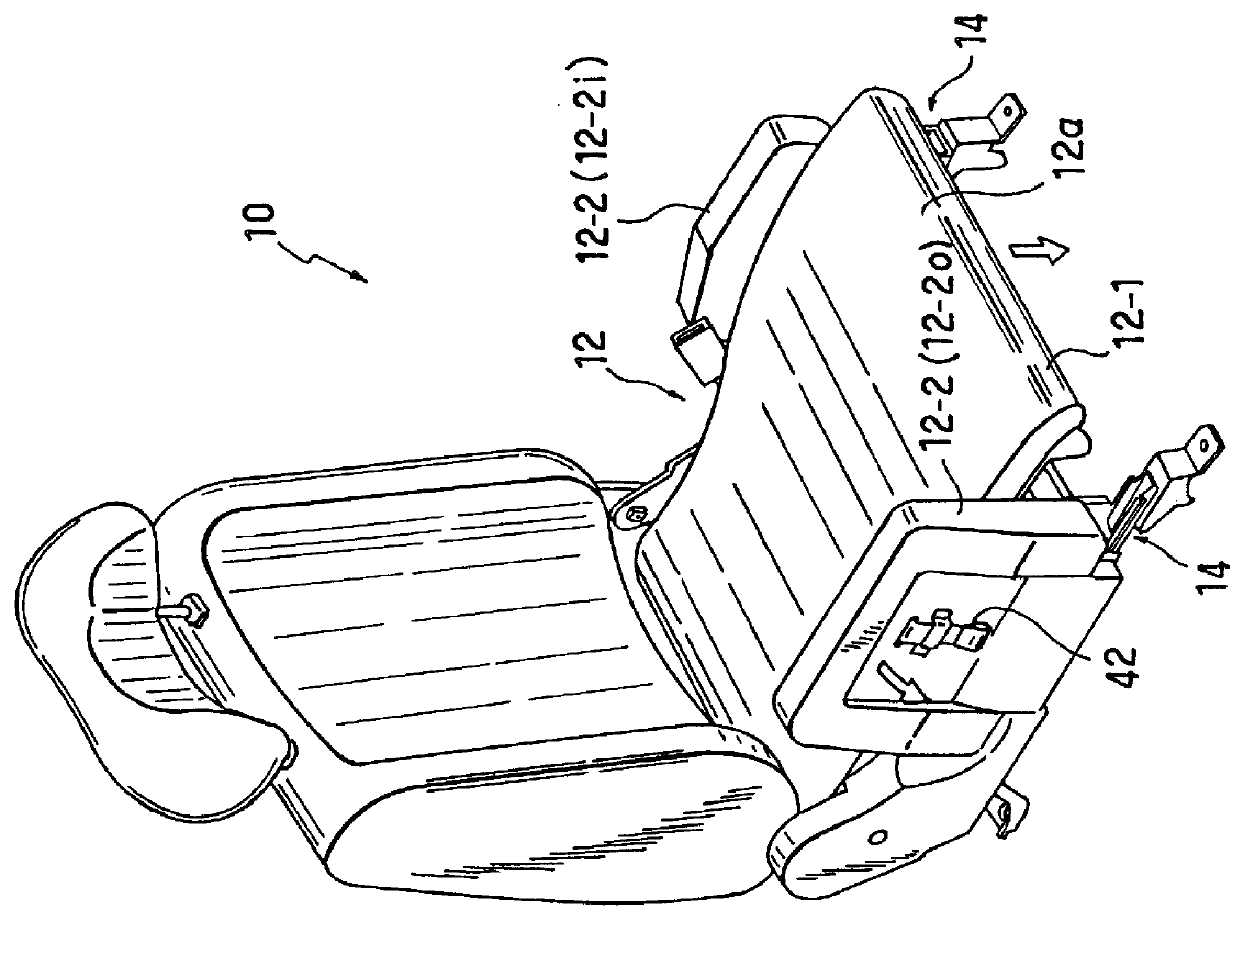 Seat provided with a seat climbing/descending aid structure for easy climbing onto and descending from the seat, and a seat climbing/descending aid designed for that purpose